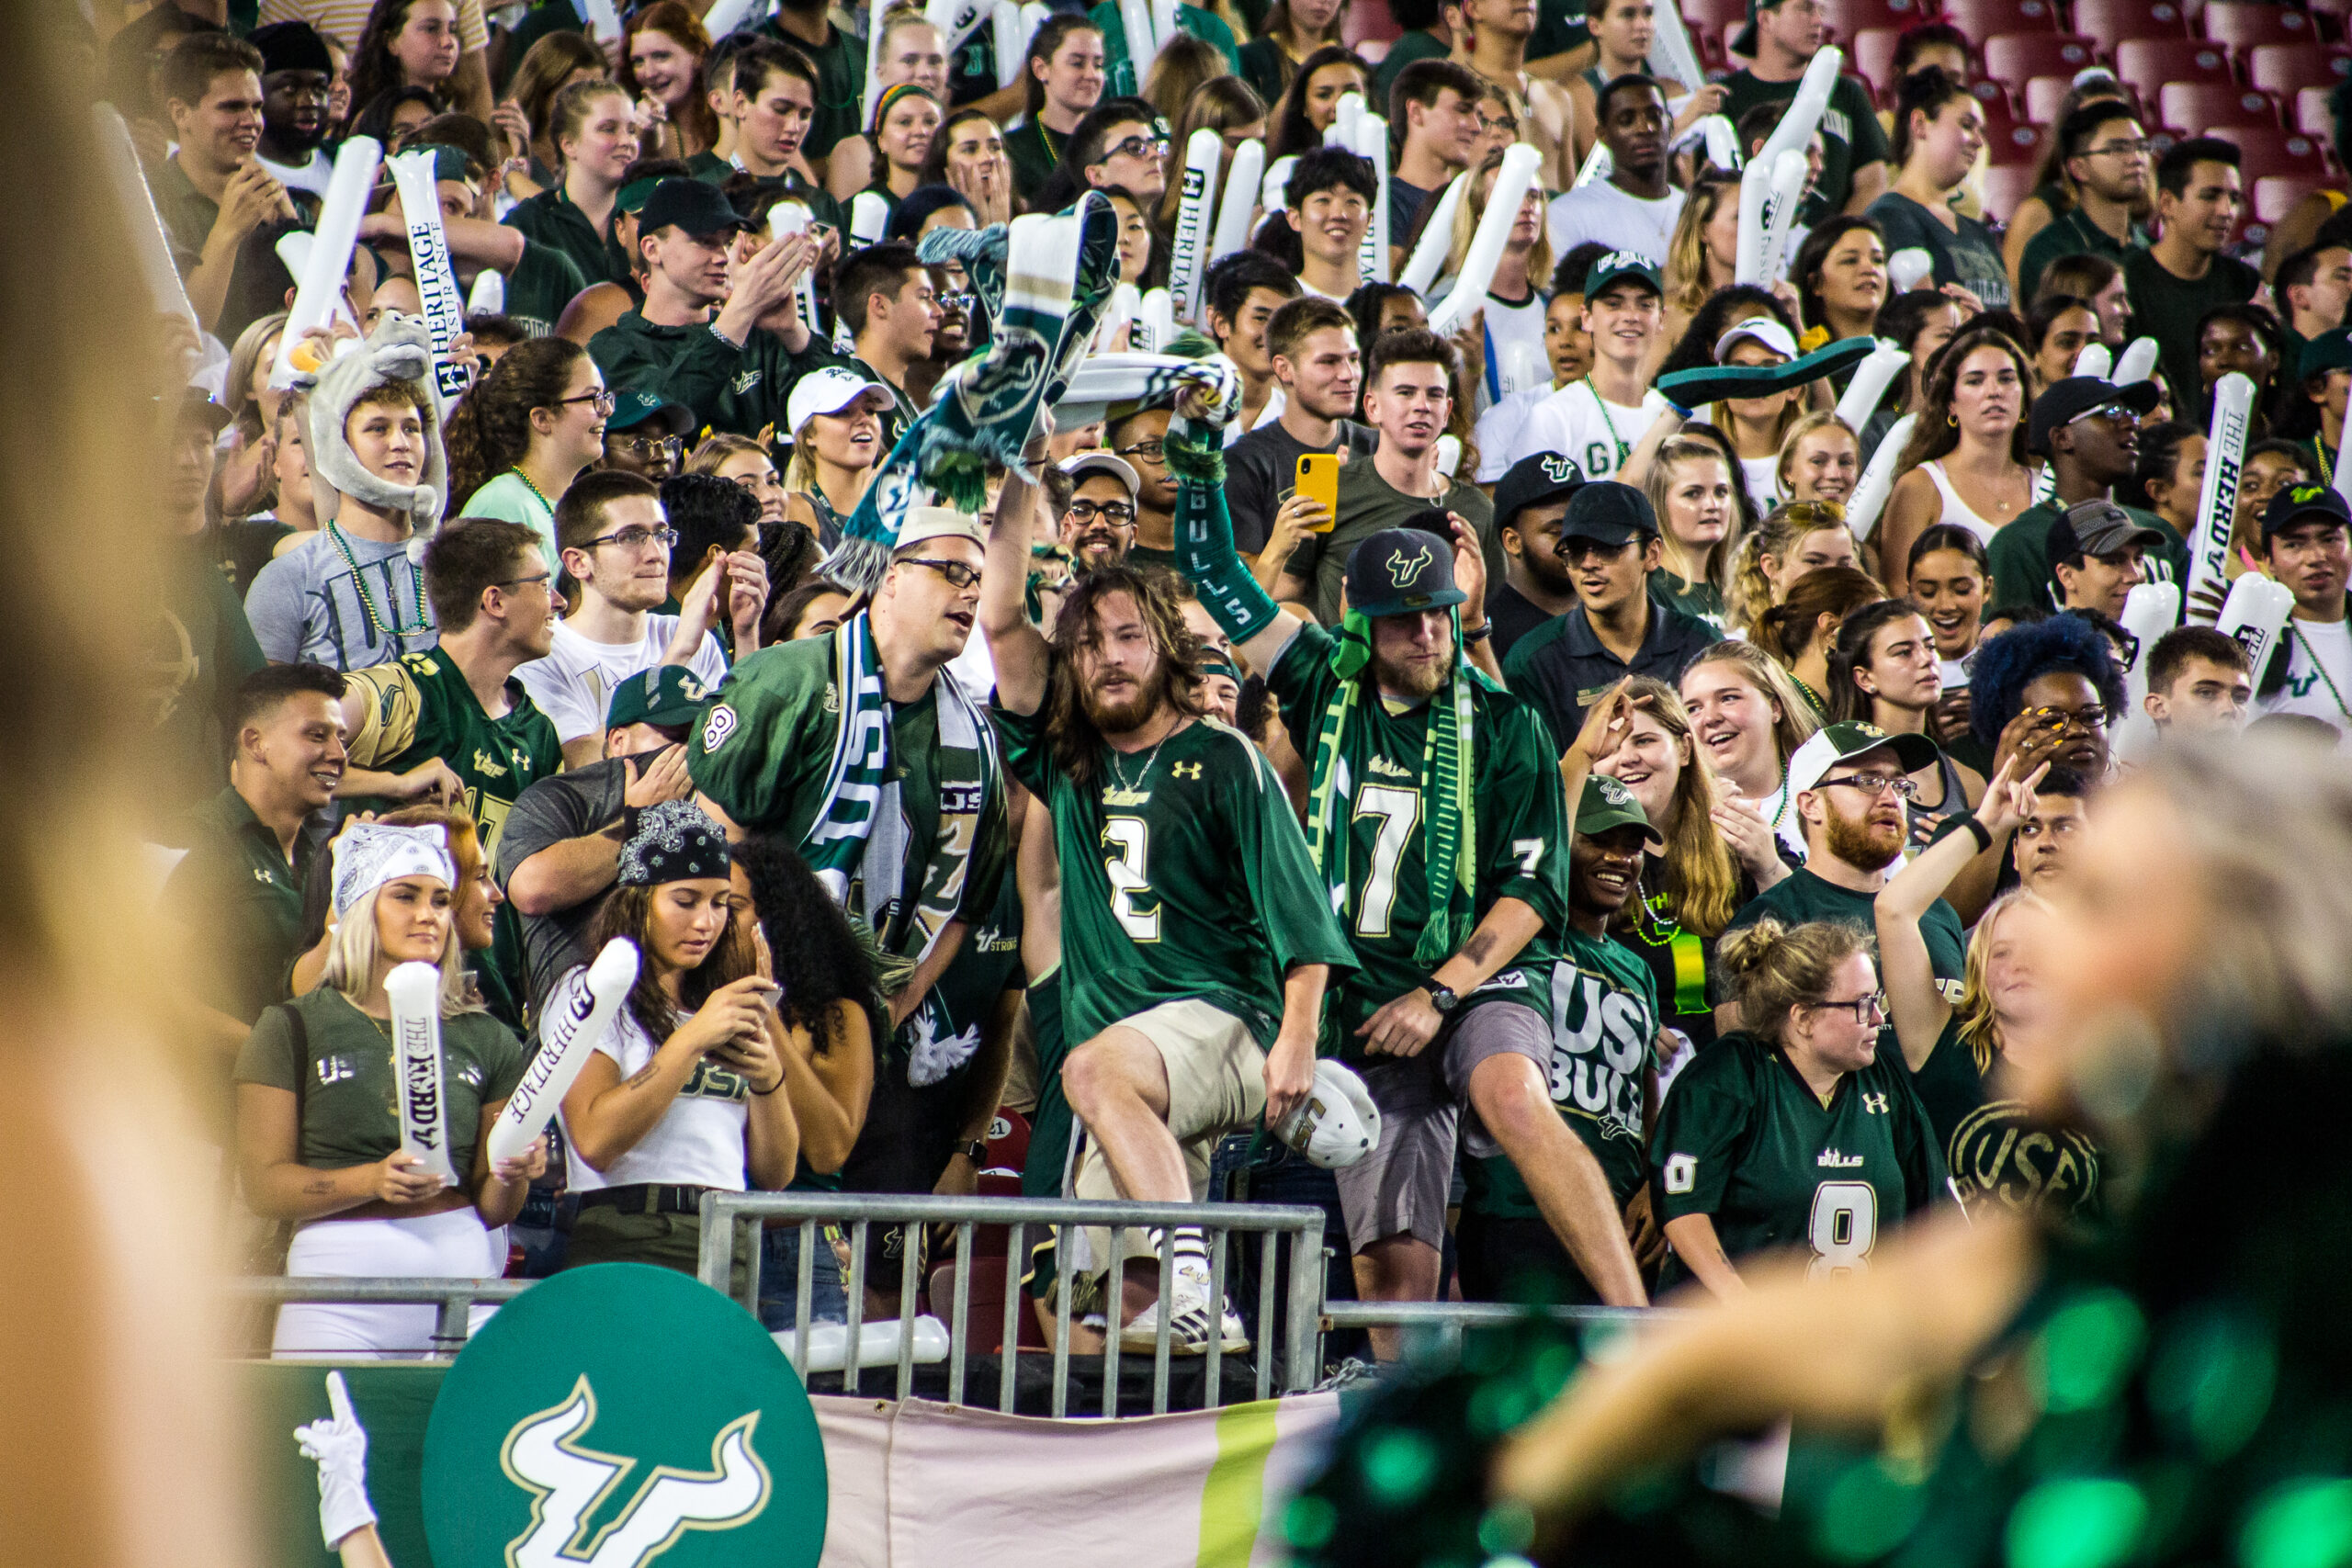 USF fans divided on attending Homecoming game